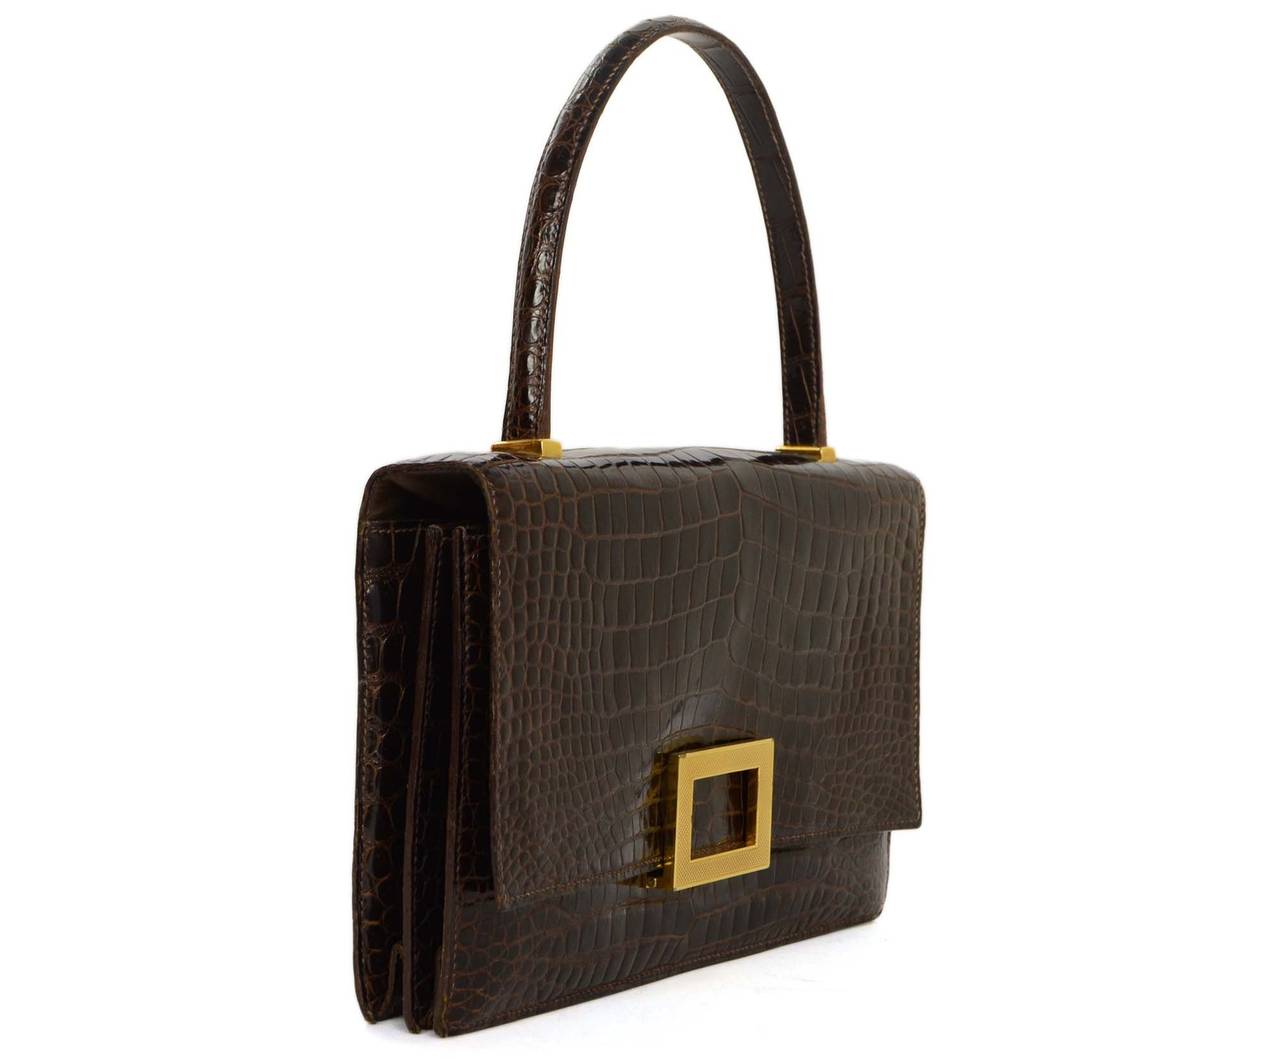 Hermes Vintage '62 Brown Glazed Croc Piano Bag
Made in: France
Year of Production: 1962
Color: Brown and goldtone
Hardware: Goldtone
Materials: Glazed crocodile and leather
Lining: Brown leather
Closure/opening: Flap top with goldtone square